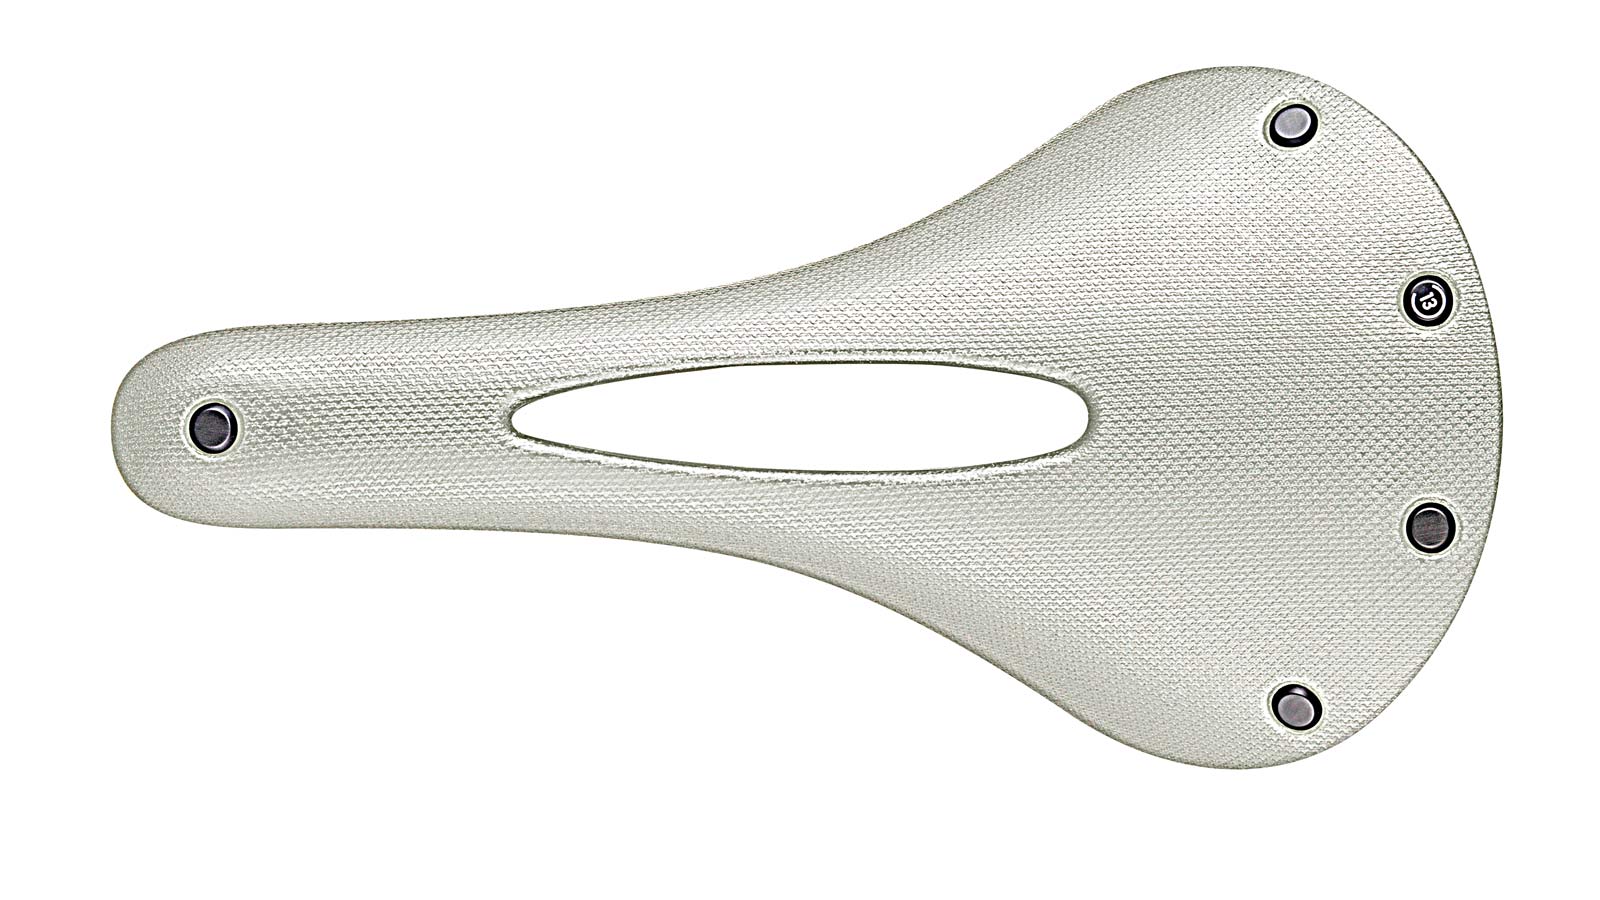 Brooks Cambium C13 All-Weather saddle_waterproof rubber nylon carbon-railed lightweight performance bicycle saddle